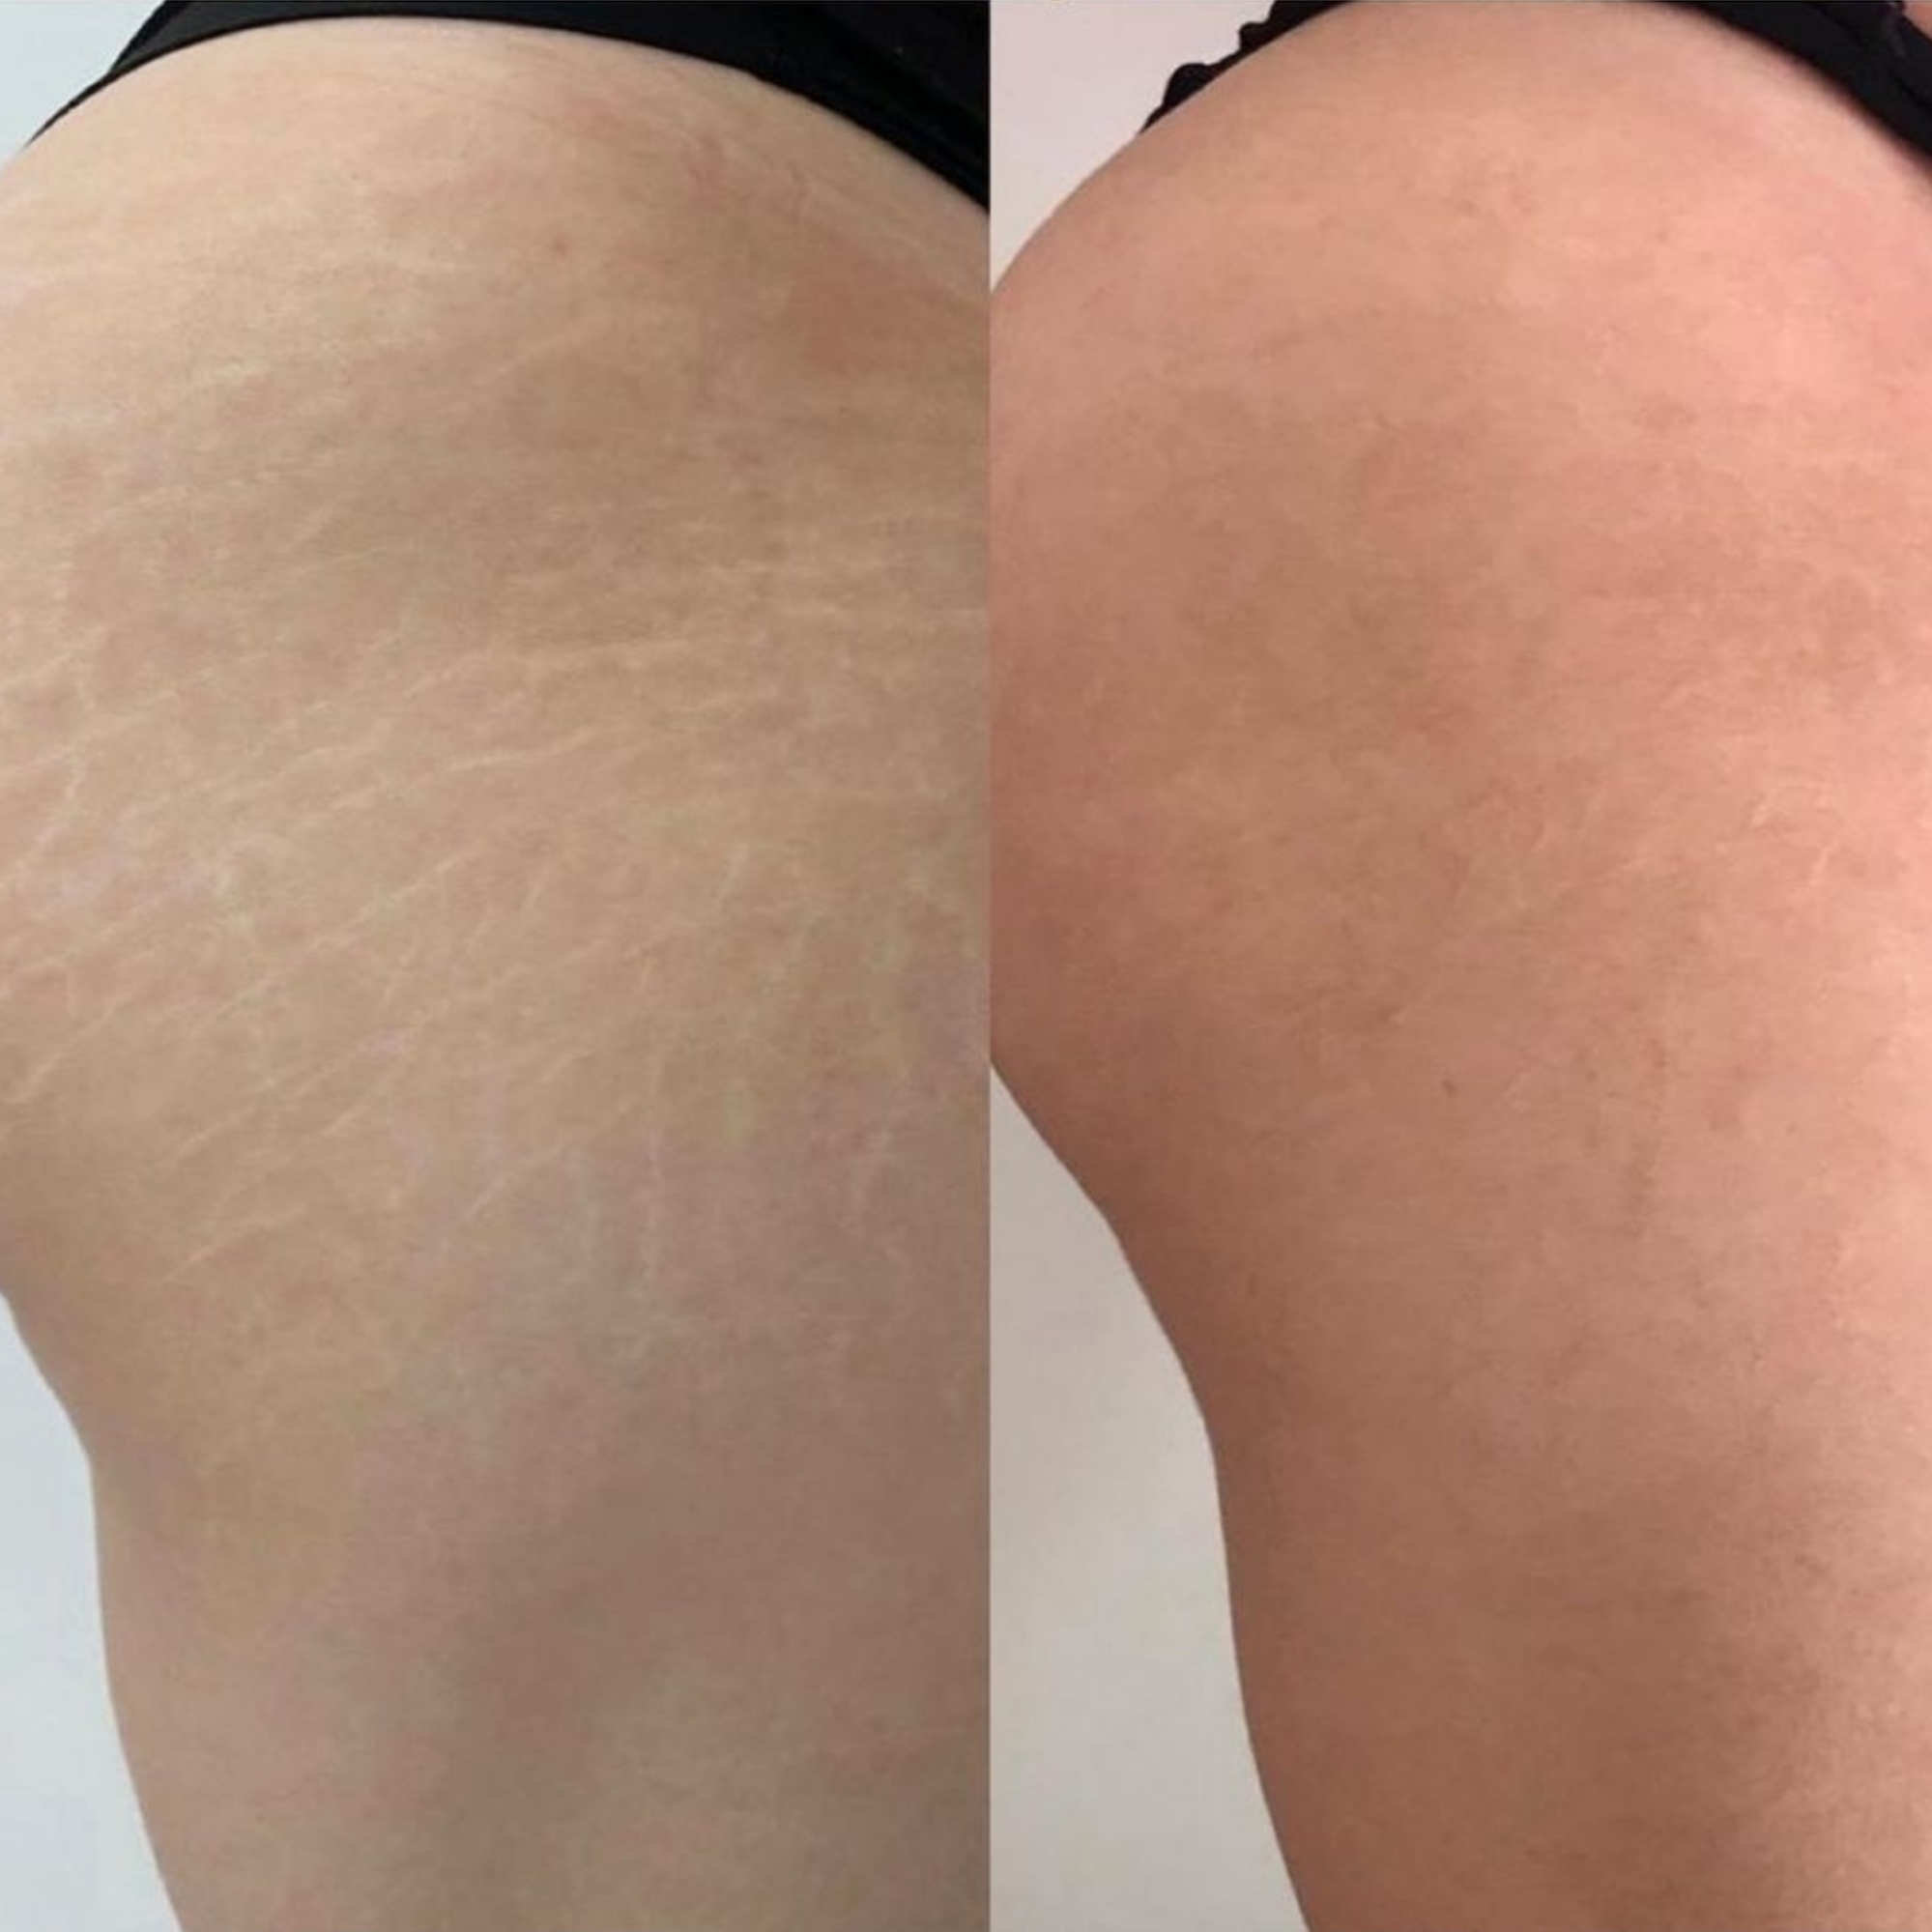 Before and after stretch mark laser removal on the thighs